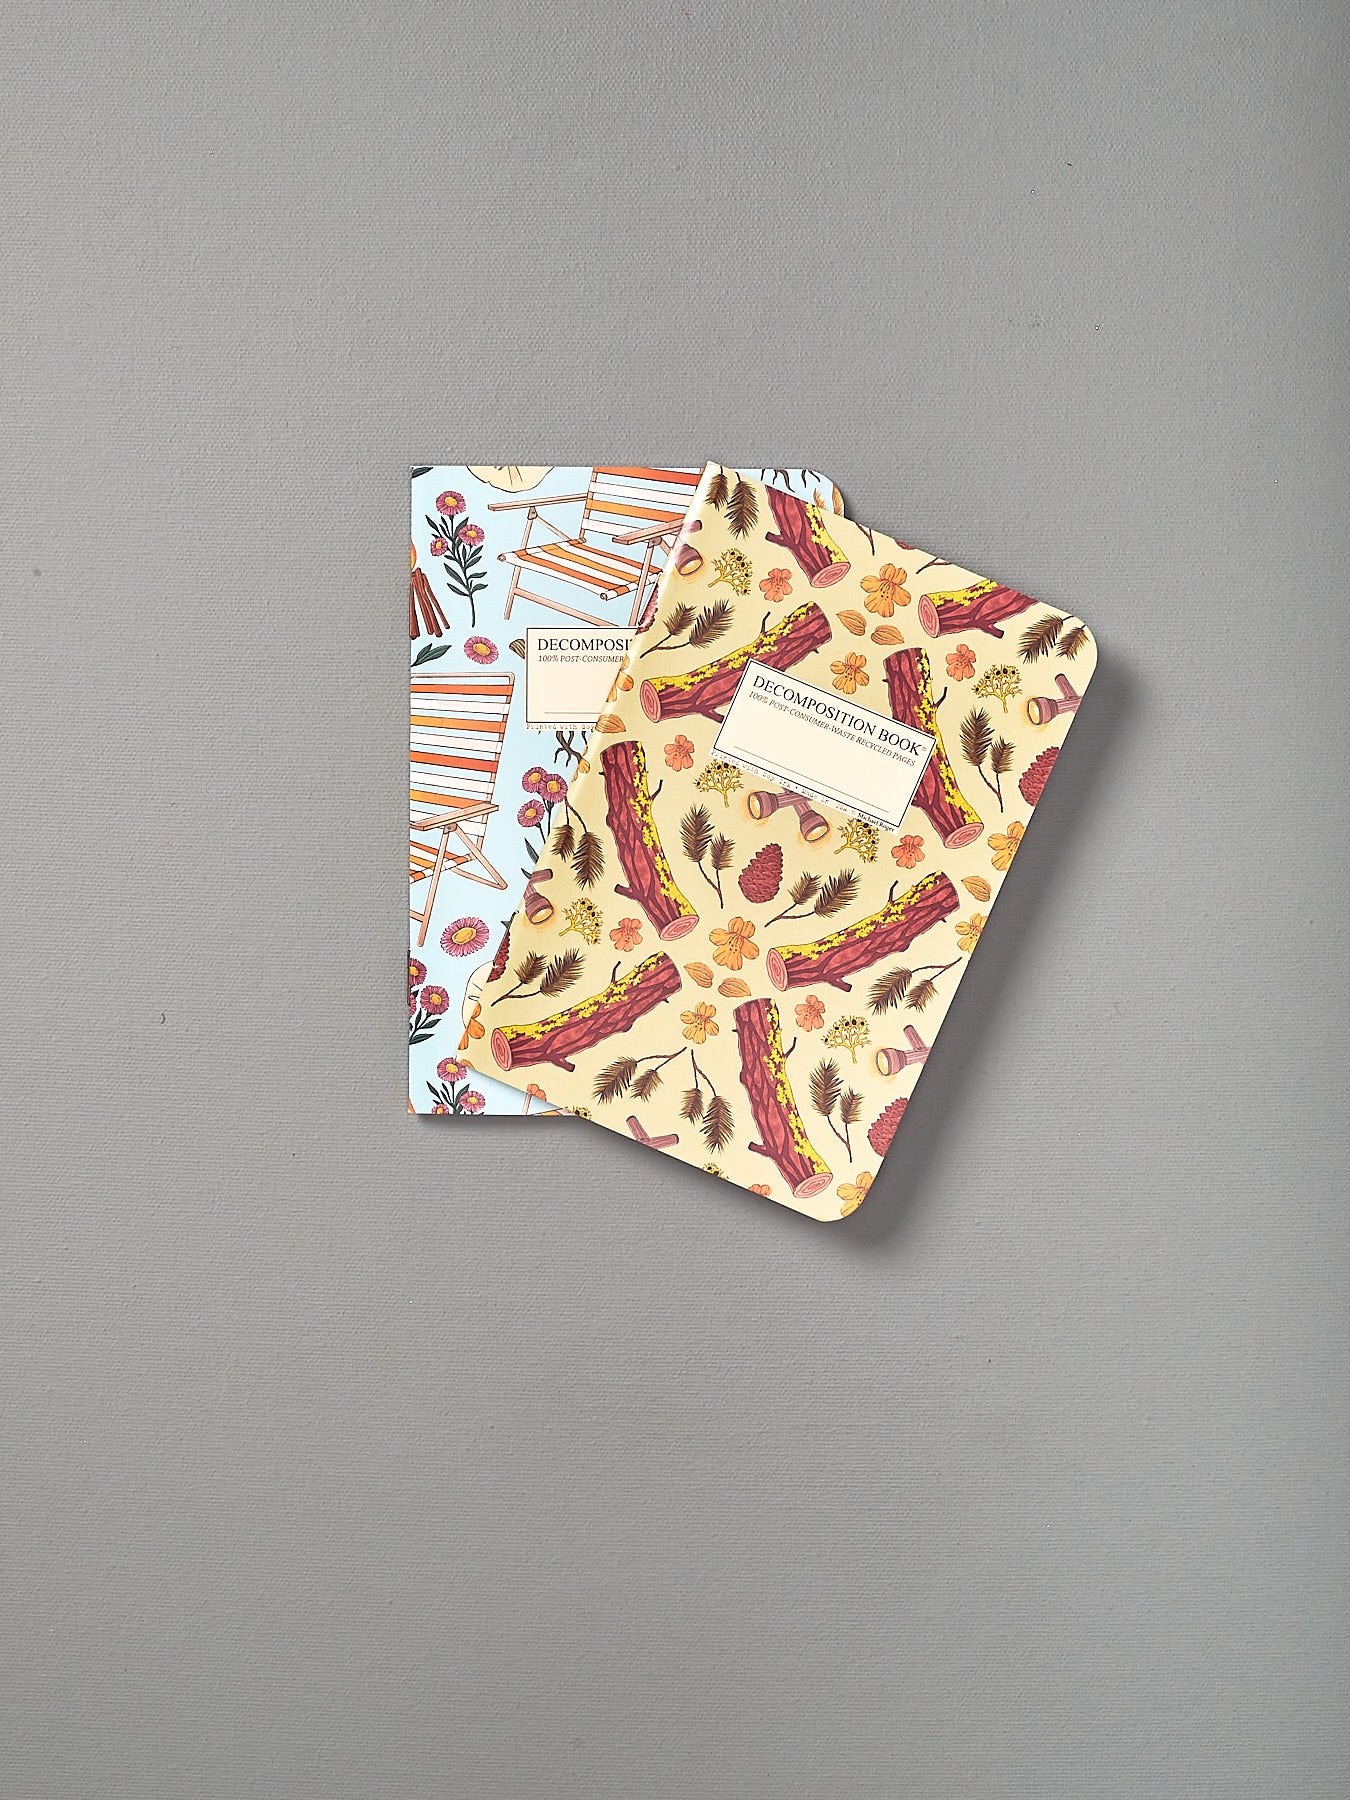 Two Decomposition Recycled Notebook Sets – Pocket Sized/Ruled (Ponderosa & Mendocino) with pizza designs on them.